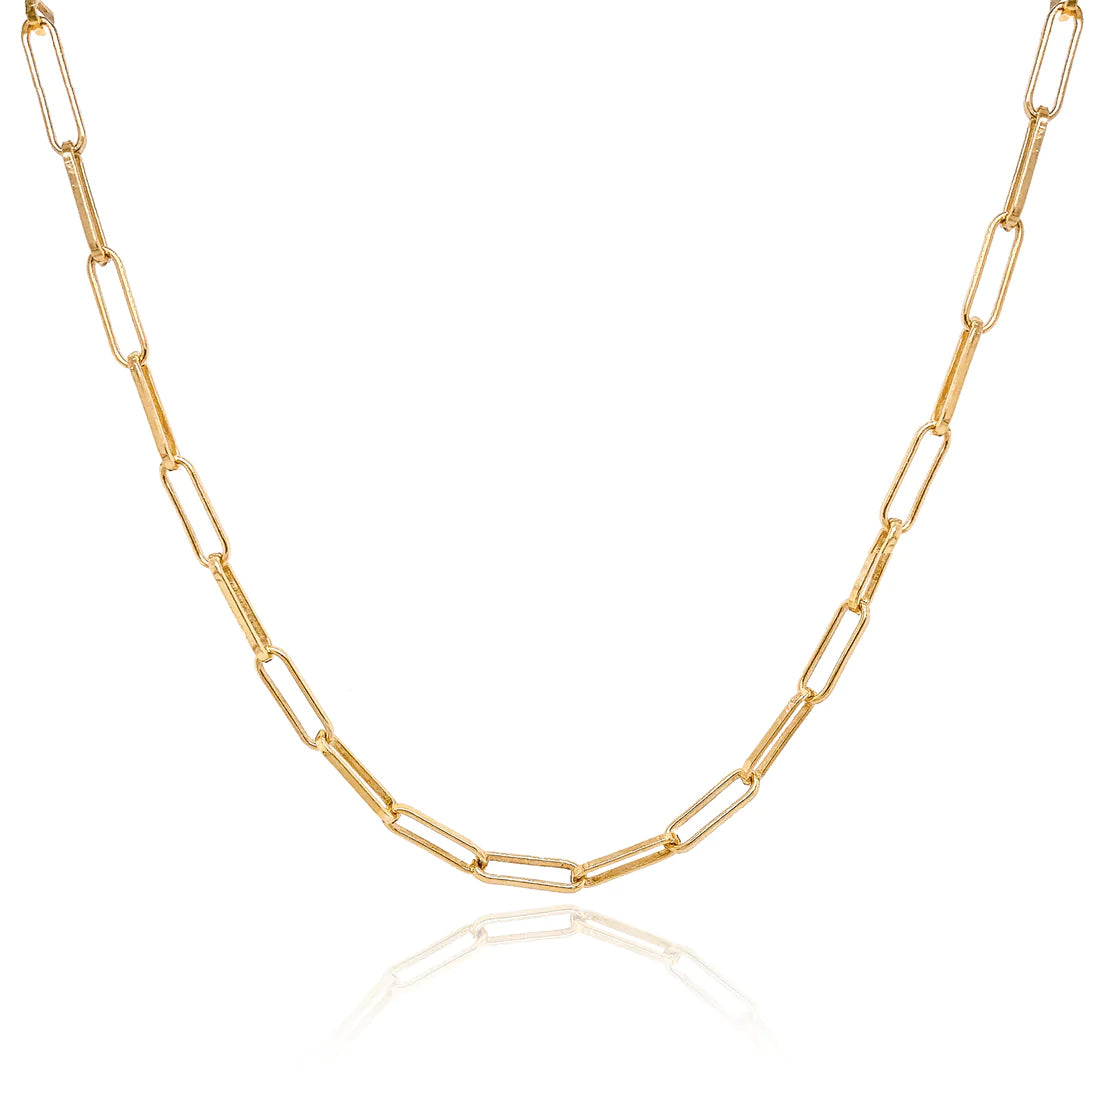 Mod + Jo • Charlie Paperclip Chain Necklace • 14K Gold Fill